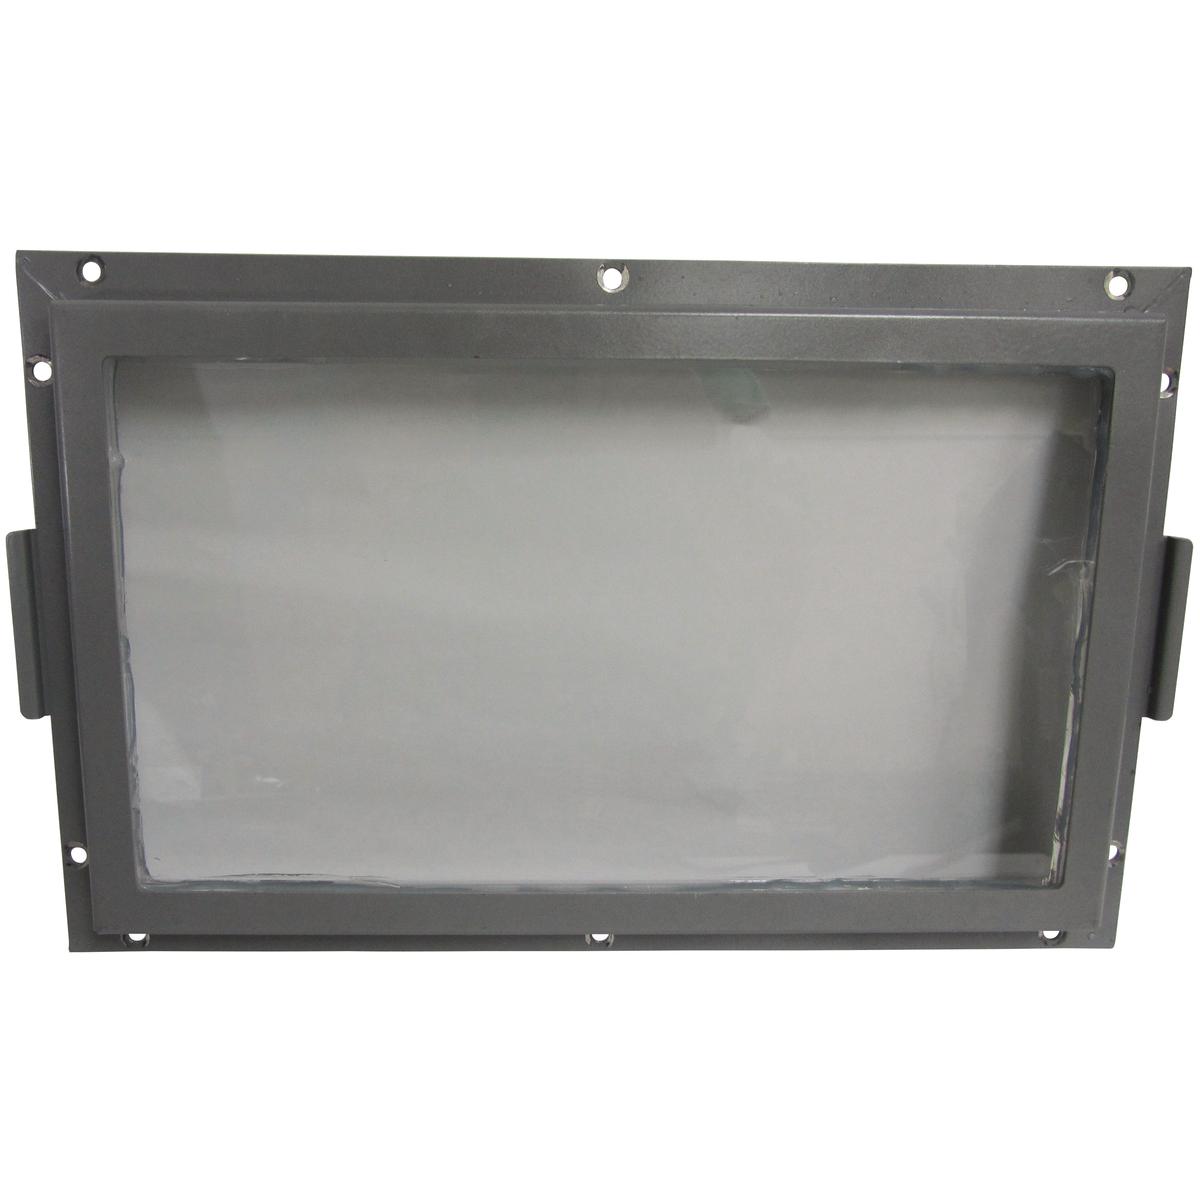 Hubbell KFL-DOOR Replacement Door/Glass for KFL Flood  ; The KFL Series LED floodlights are designed with a copper-free aluminum housing and painted with a powder epoxy finish for superior corrosion resistance in harsh and hazardous environments. Killark LED floodlights p